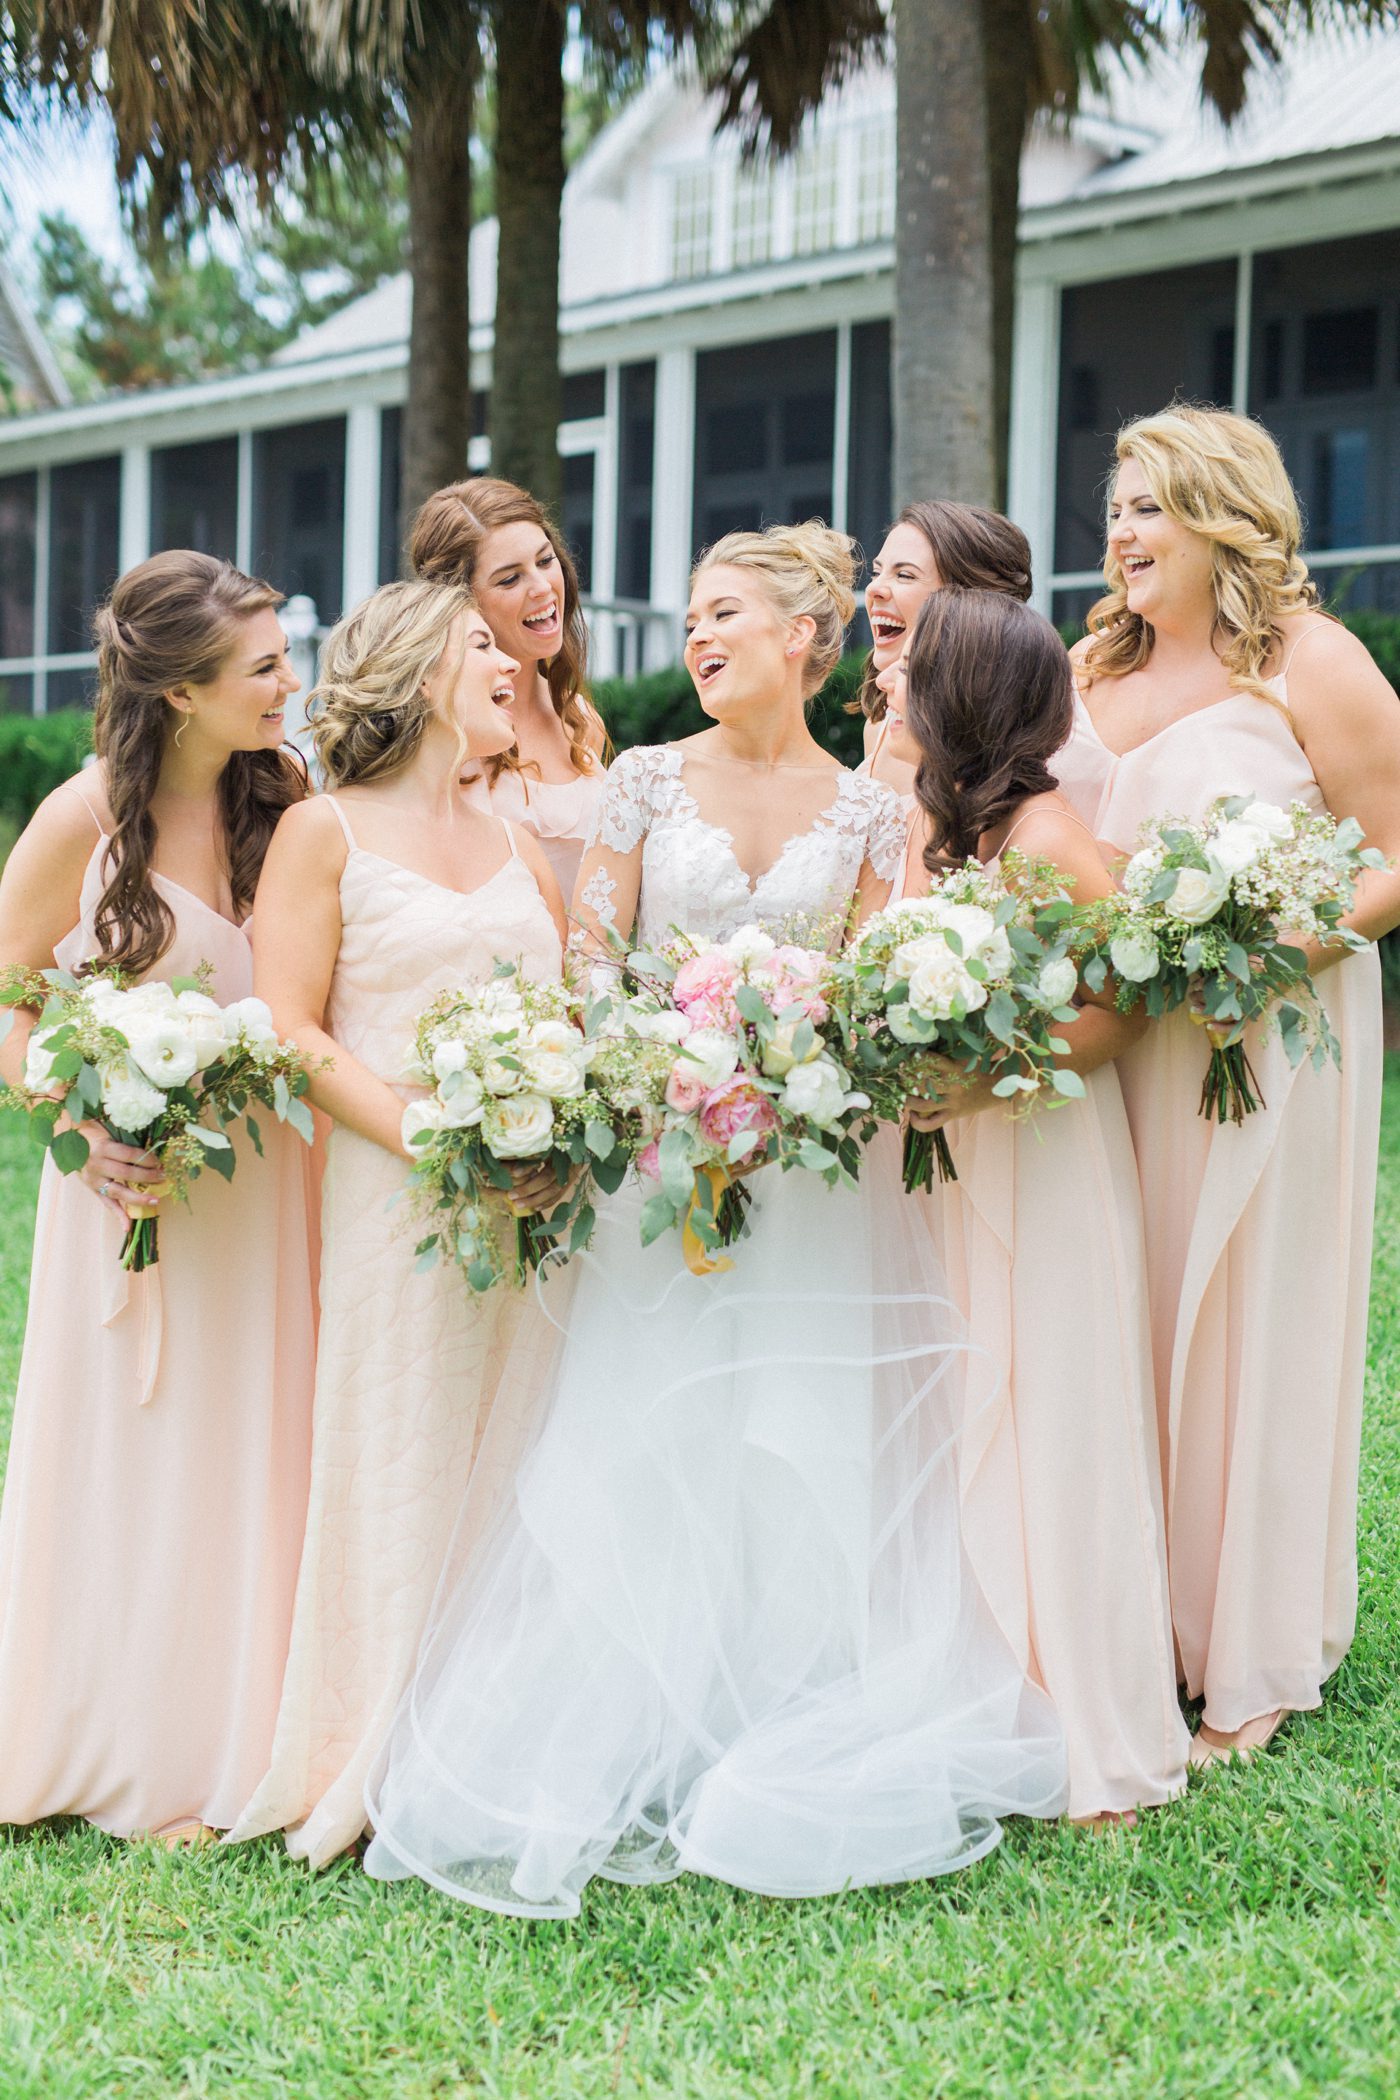 Candid picture of bride and bridesmaids laughing. Photo by Catherine Ann Photography